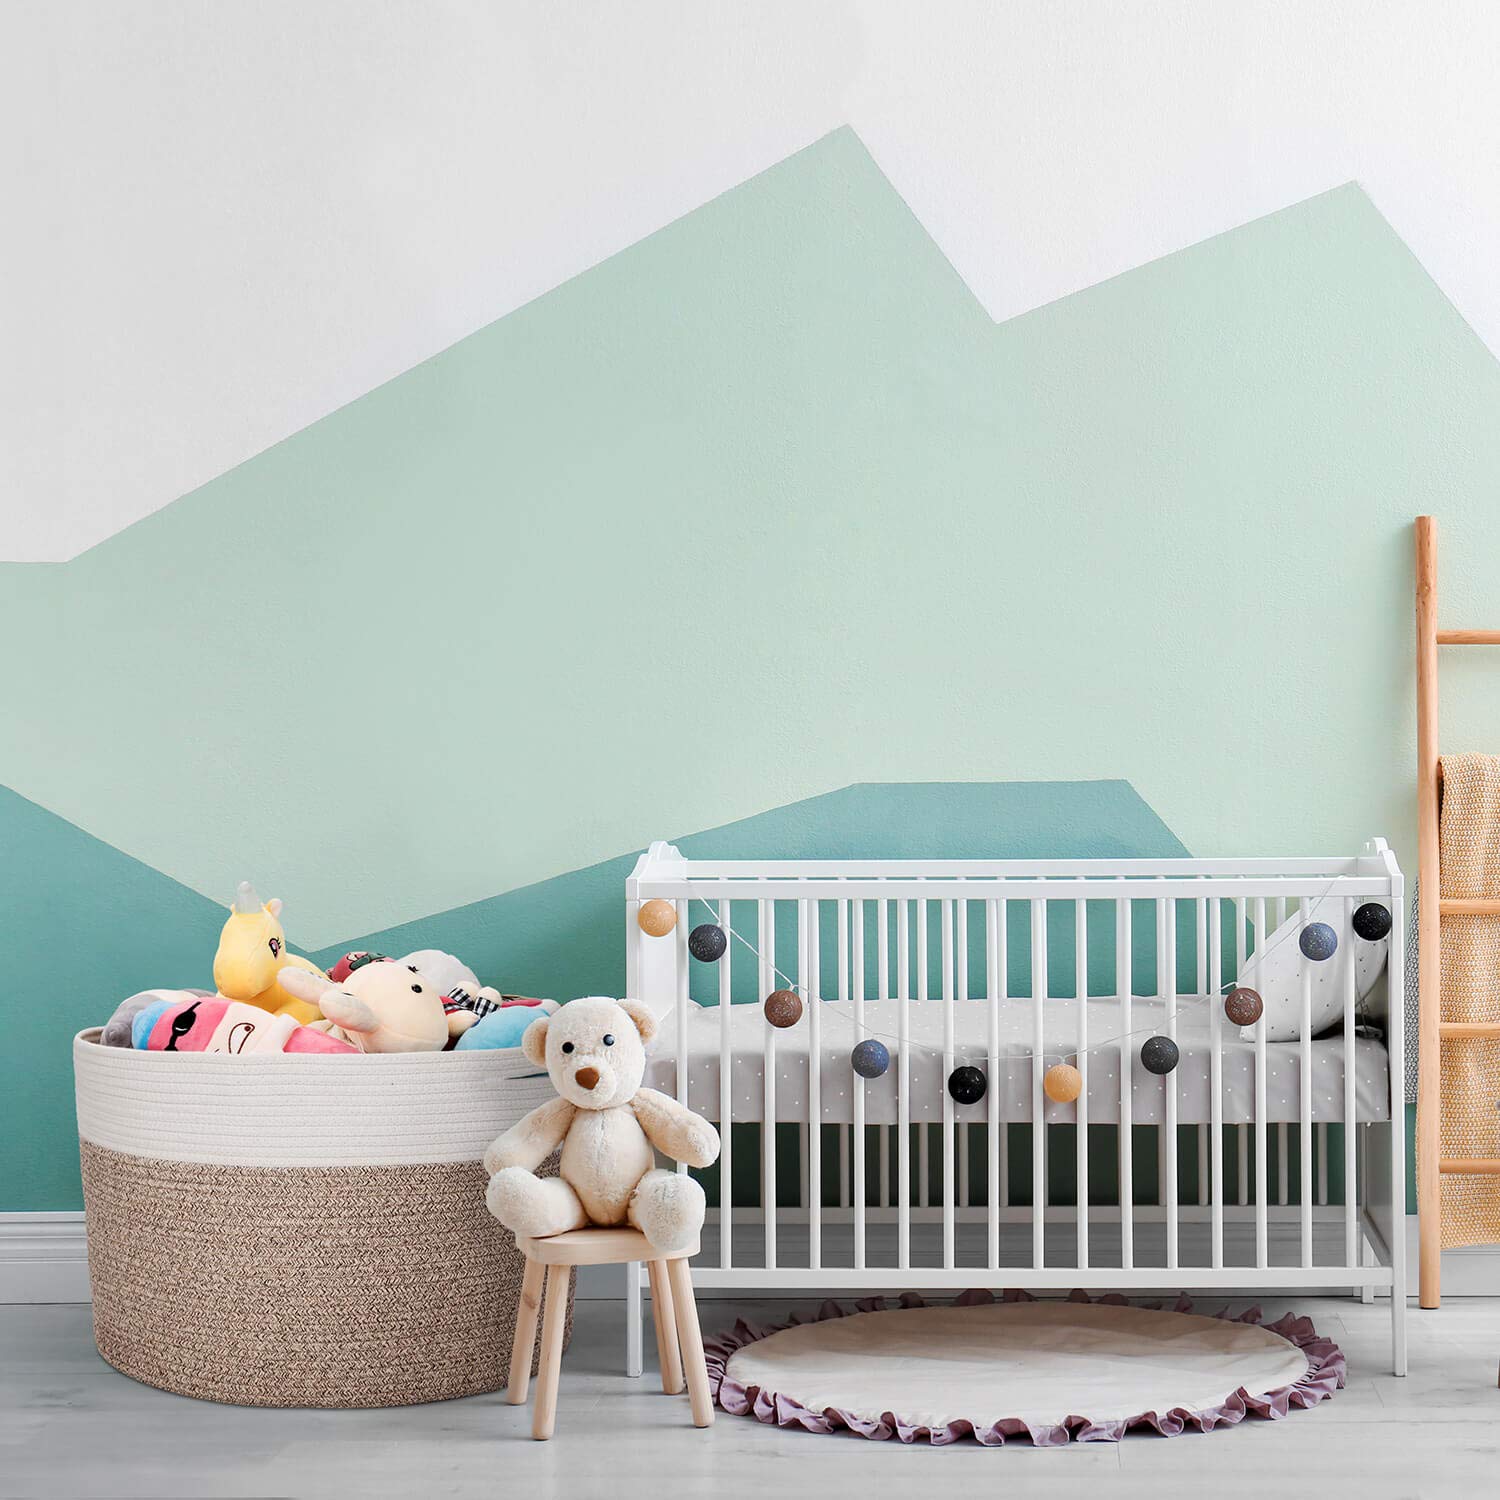 kid's room with a crib, toy basket, and other decorations